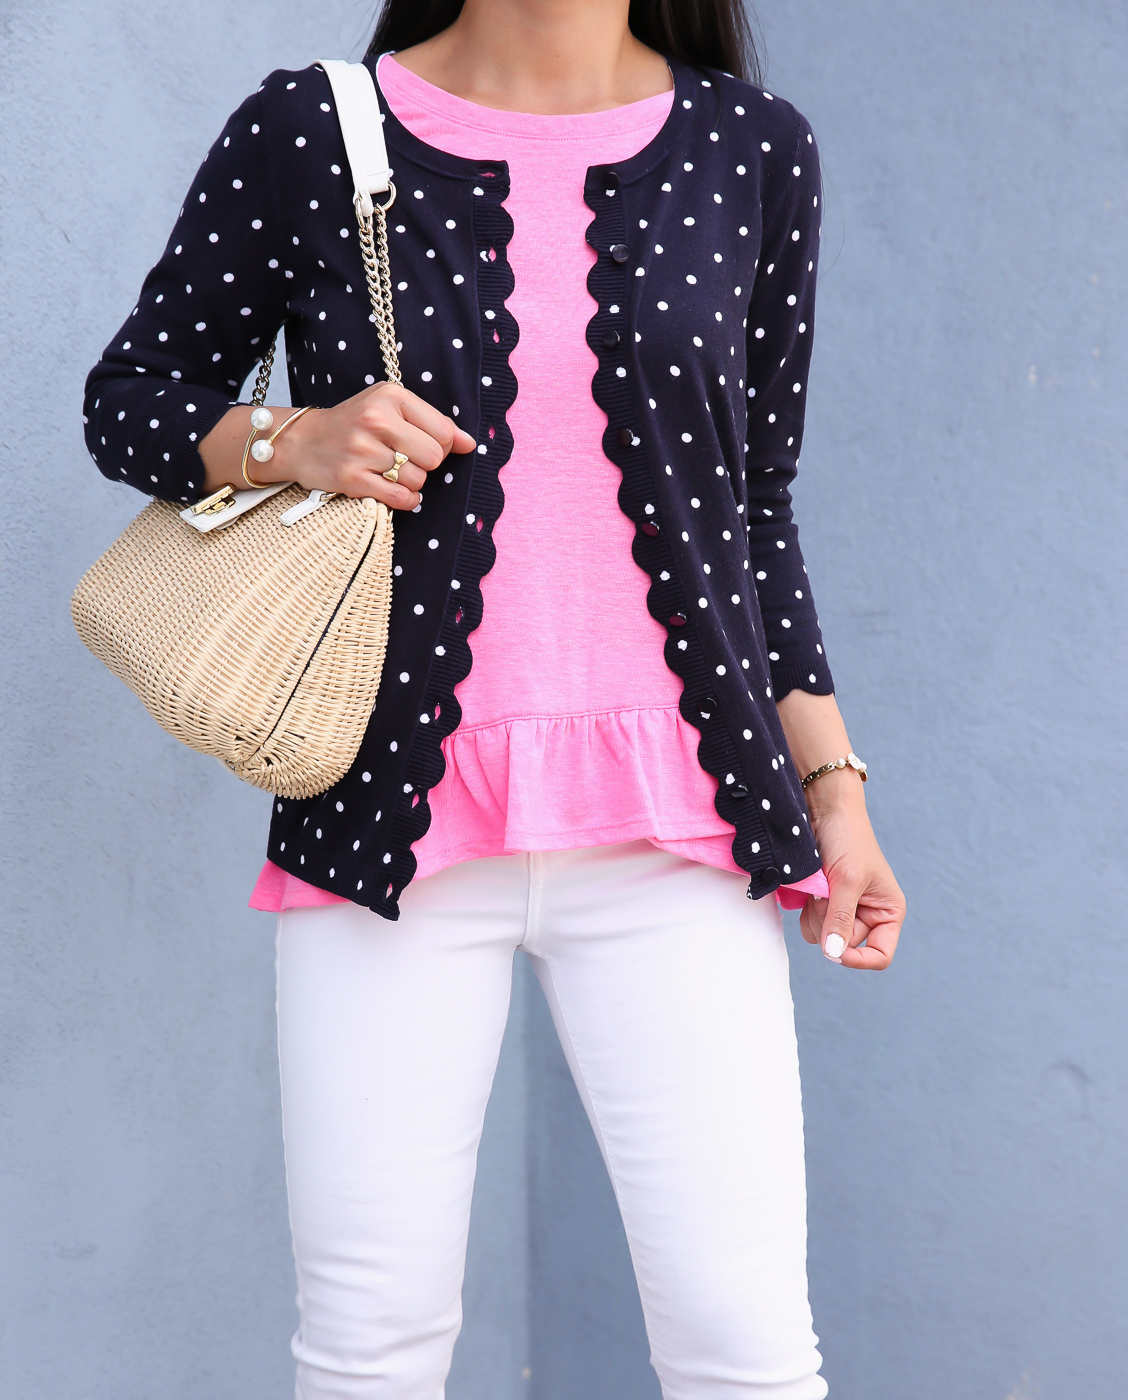 wicker shoulder bag ruffle hem tee scalloped polka dot cardigan white jeans business casual summer outfit